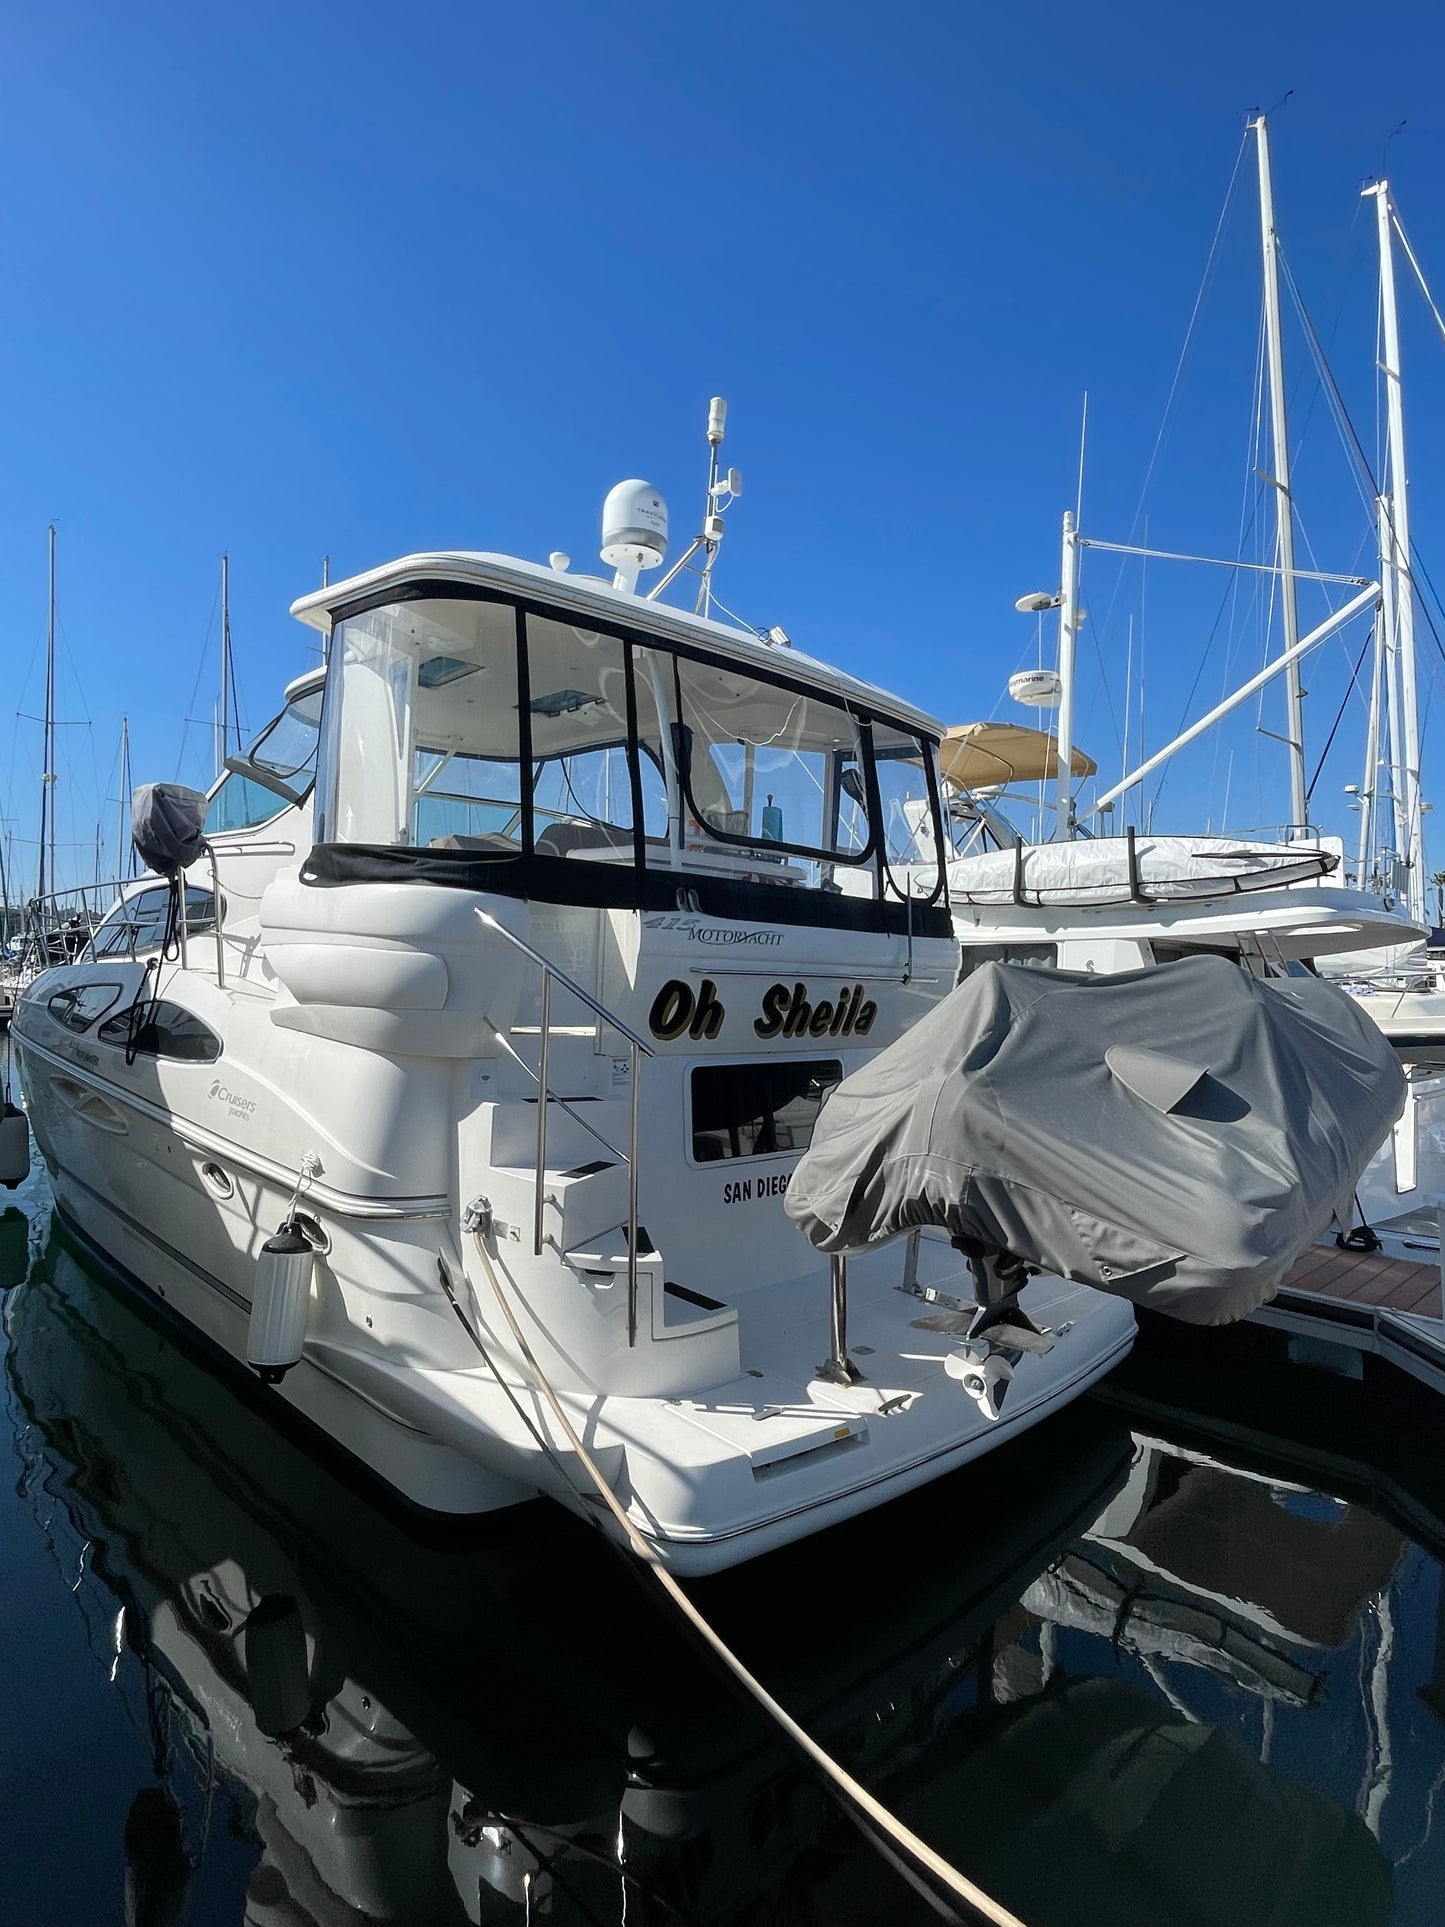 Reduced! Owners Want offers! 2006 Cruisers 415 Express MY Location San Diego, Ca